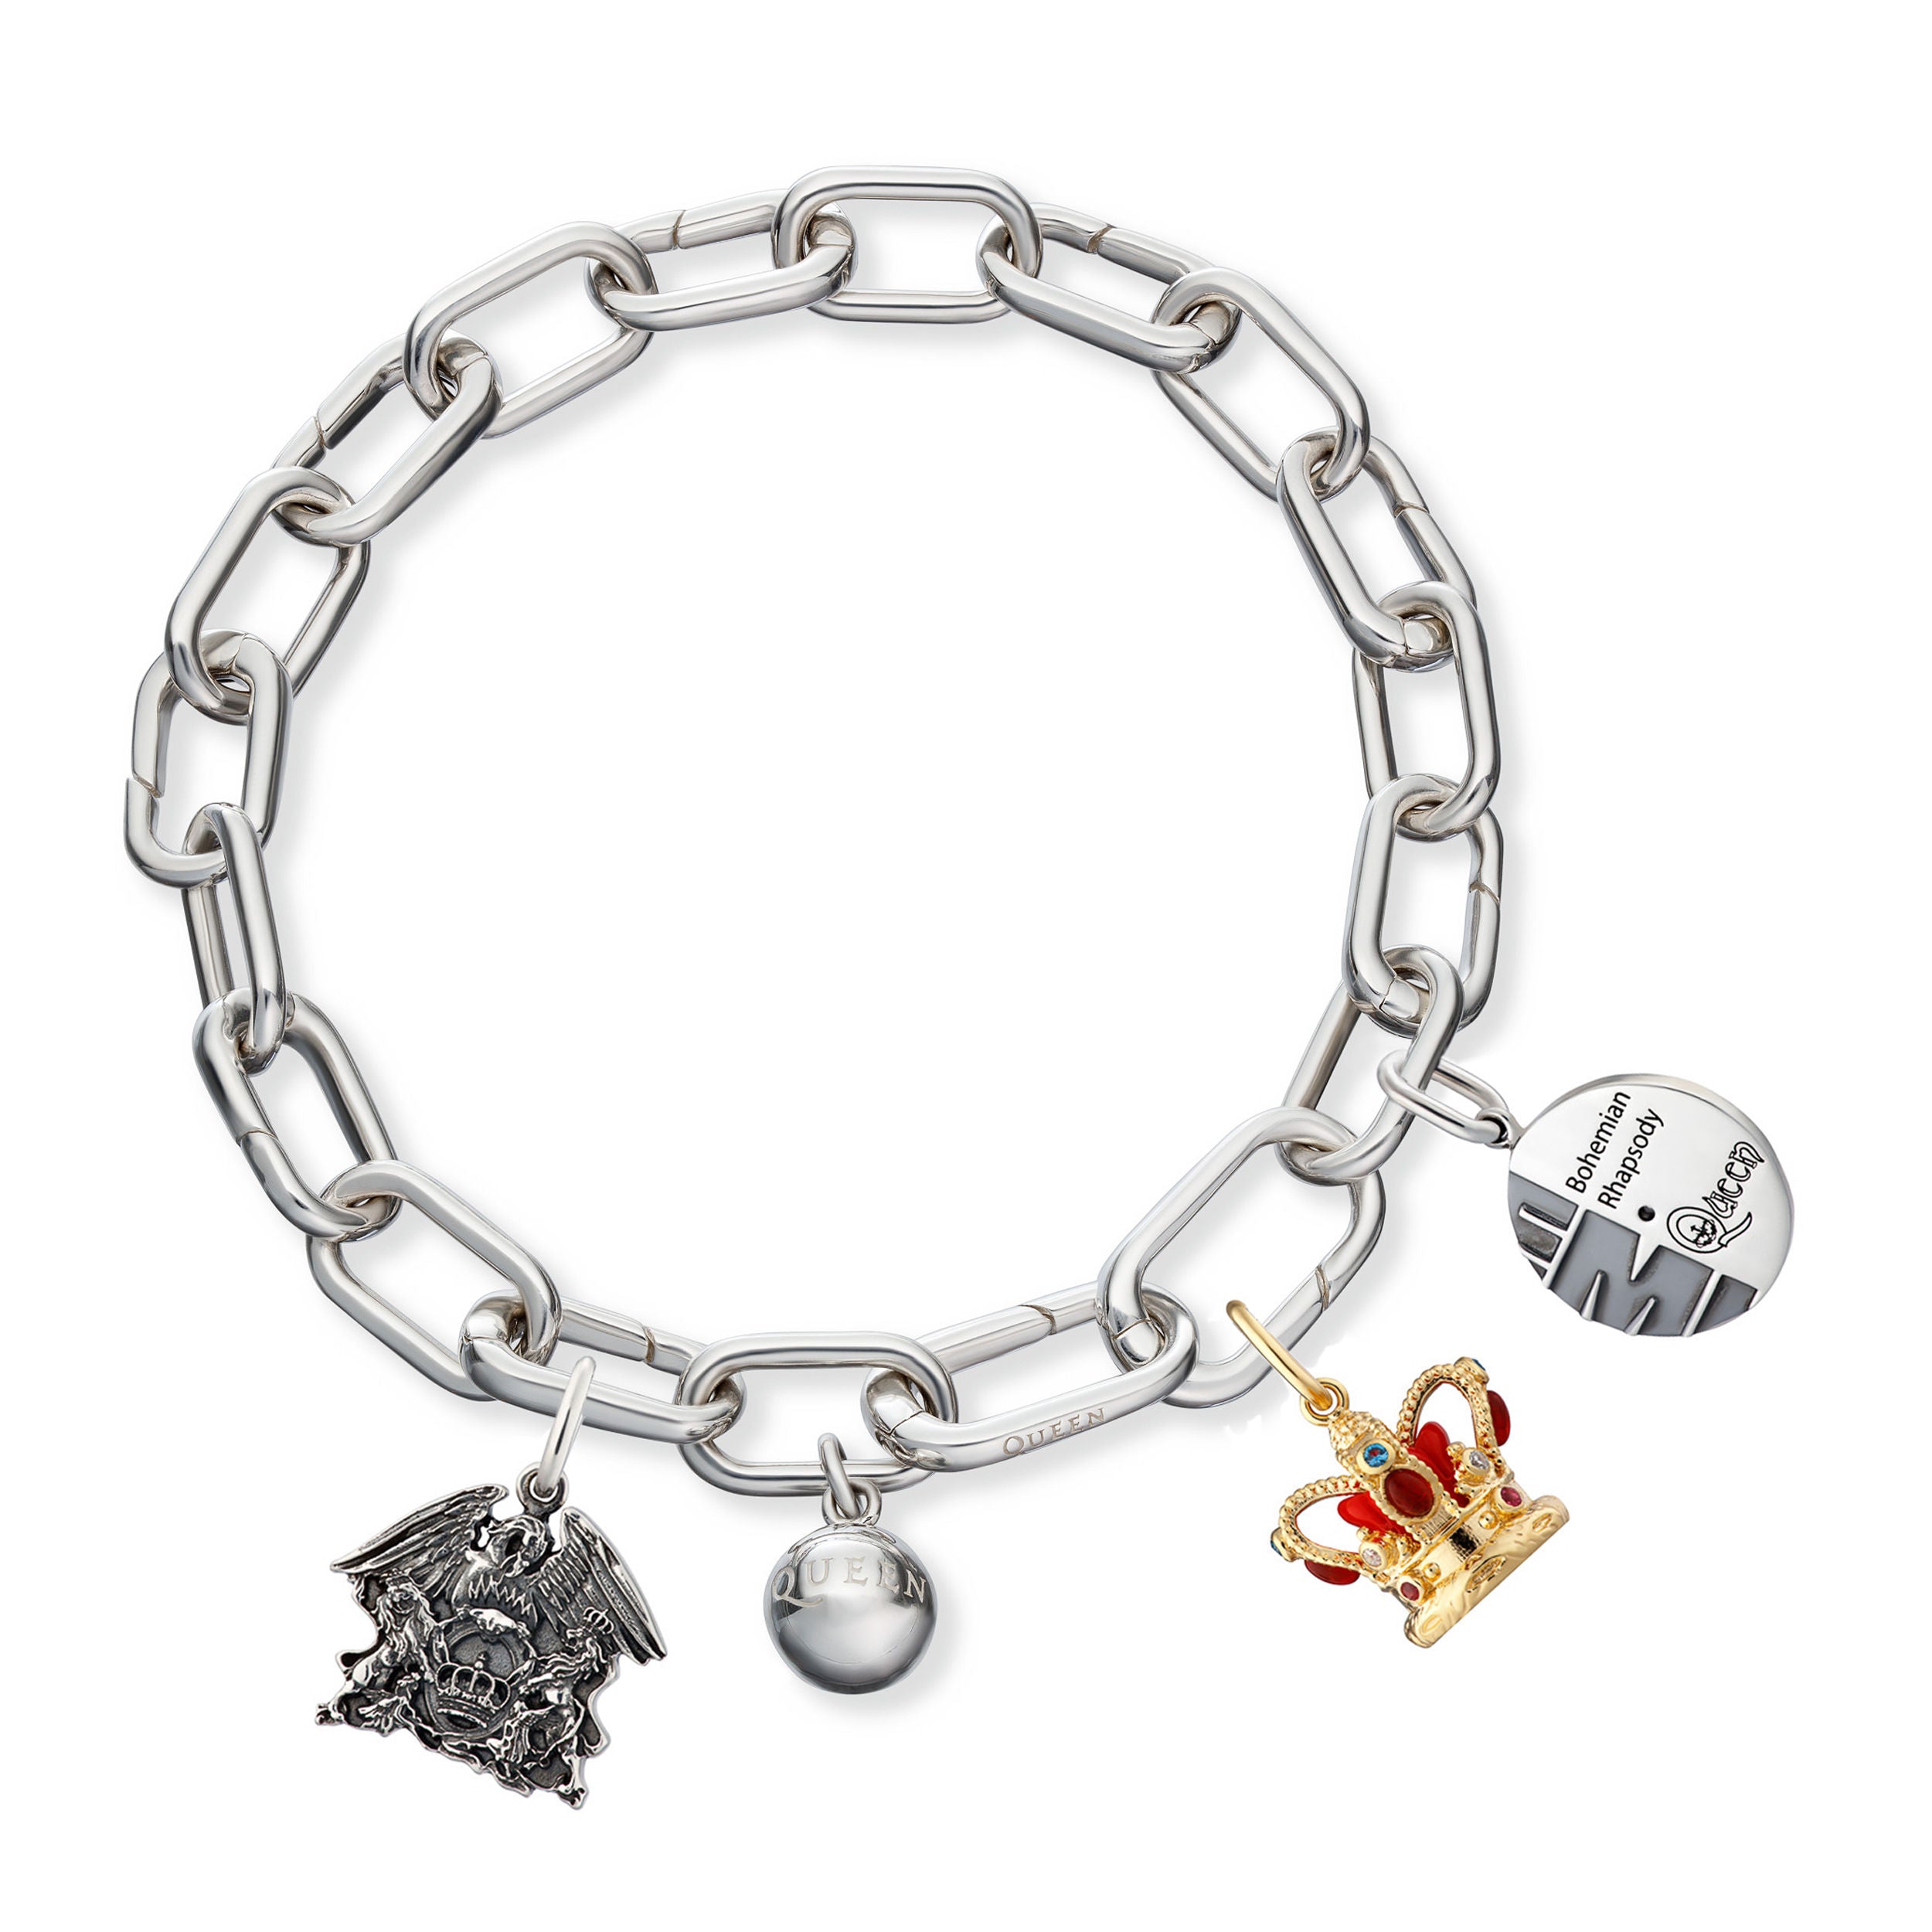 Queen - The Official Queen Silver Charm Bracelet and First 3 Charms.